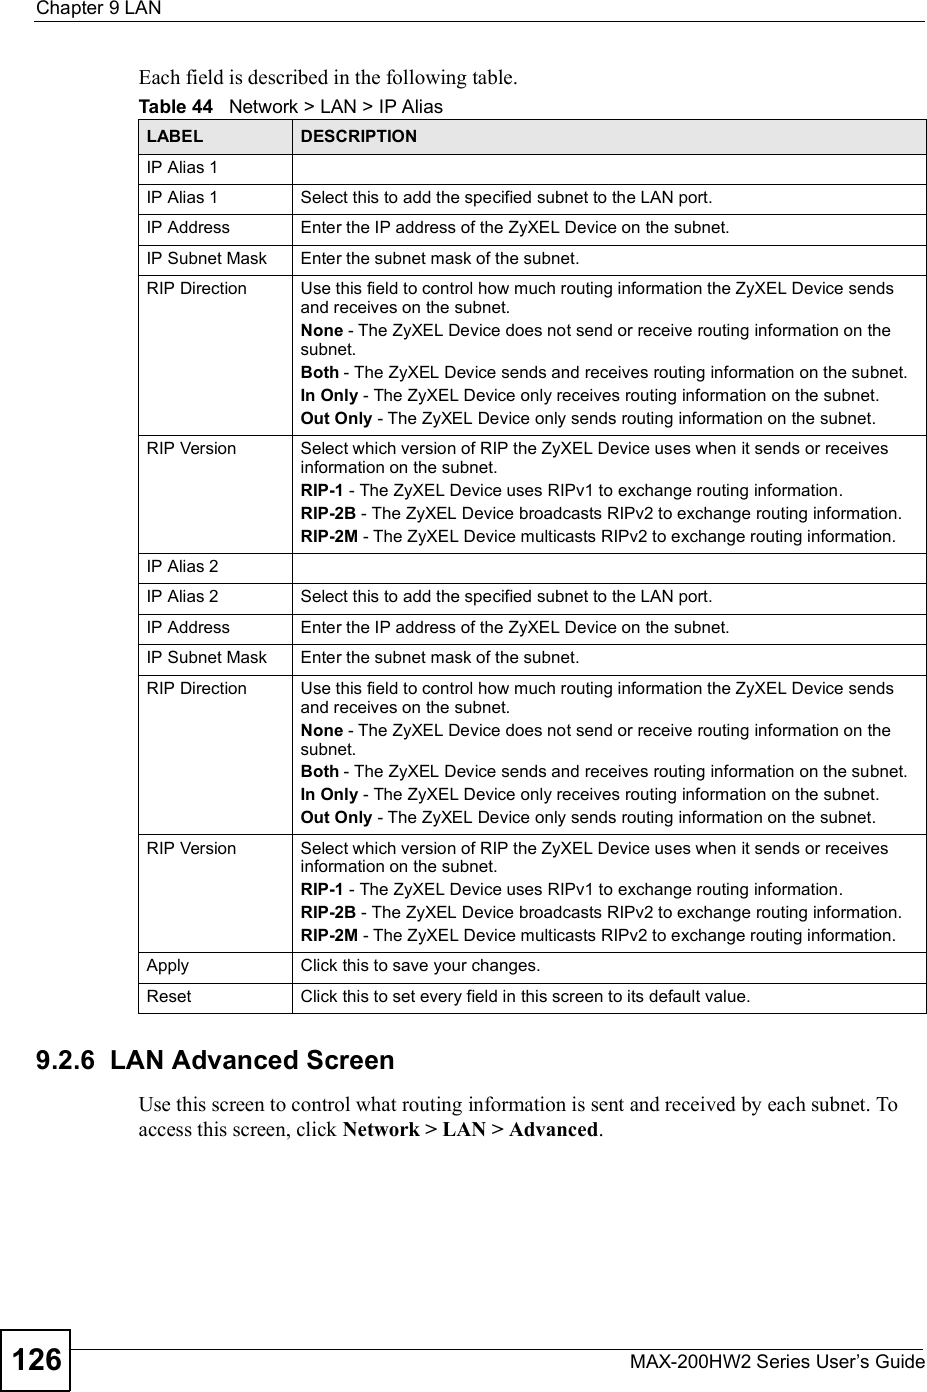 Chapter 9LANMAX-200HW2 Series User s Guide126Each field is described in the following table.9.2.6  LAN Advanced ScreenUse this screen to control what routing information is sent and received by each subnet. To access this screen, click Network &gt; LAN &gt; Advanced.Table 44   Network &gt; LAN &gt; IP AliasLABEL DESCRIPTIONIP Alias 1IP Alias 1 Select this to add the specified subnet to the LAN port.IP Address Enter the IP address of the ZyXEL Device on the subnet.IP Subnet Mask Enter the subnet mask of the subnet.RIP Direction Use this field to control how much routing information the ZyXEL Device sends and receives on the subnet.None - The ZyXEL Device does not send or receive routing information on the subnet.Both - The ZyXEL Device sends and receives routing information on the subnet.In Only - The ZyXEL Device only receives routing information on the subnet.Out Only - The ZyXEL Device only sends routing information on the subnet.RIP Version Select which version of RIP the ZyXEL Device uses when it sends or receives information on the subnet.RIP-1 - The ZyXEL Device uses RIPv1 to exchange routing information.RIP-2B - The ZyXEL Device broadcasts RIPv2 to exchange routing information.RIP-2M - The ZyXEL Device multicasts RIPv2 to exchange routing information.IP Alias 2IP Alias 2 Select this to add the specified subnet to the LAN port.IP Address Enter the IP address of the ZyXEL Device on the subnet.IP Subnet Mask Enter the subnet mask of the subnet.RIP Direction Use this field to control how much routing information the ZyXEL Device sends and receives on the subnet.None - The ZyXEL Device does not send or receive routing information on the subnet.Both - The ZyXEL Device sends and receives routing information on the subnet.In Only - The ZyXEL Device only receives routing information on the subnet.Out Only - The ZyXEL Device only sends routing information on the subnet.RIP Version Select which version of RIP the ZyXEL Device uses when it sends or receives information on the subnet.RIP-1 - The ZyXEL Device uses RIPv1 to exchange routing information.RIP-2B - The ZyXEL Device broadcasts RIPv2 to exchange routing information.RIP-2M - The ZyXEL Device multicasts RIPv2 to exchange routing information.Apply Click this to save your changes.Reset Click this to set every field in this screen to its default value.